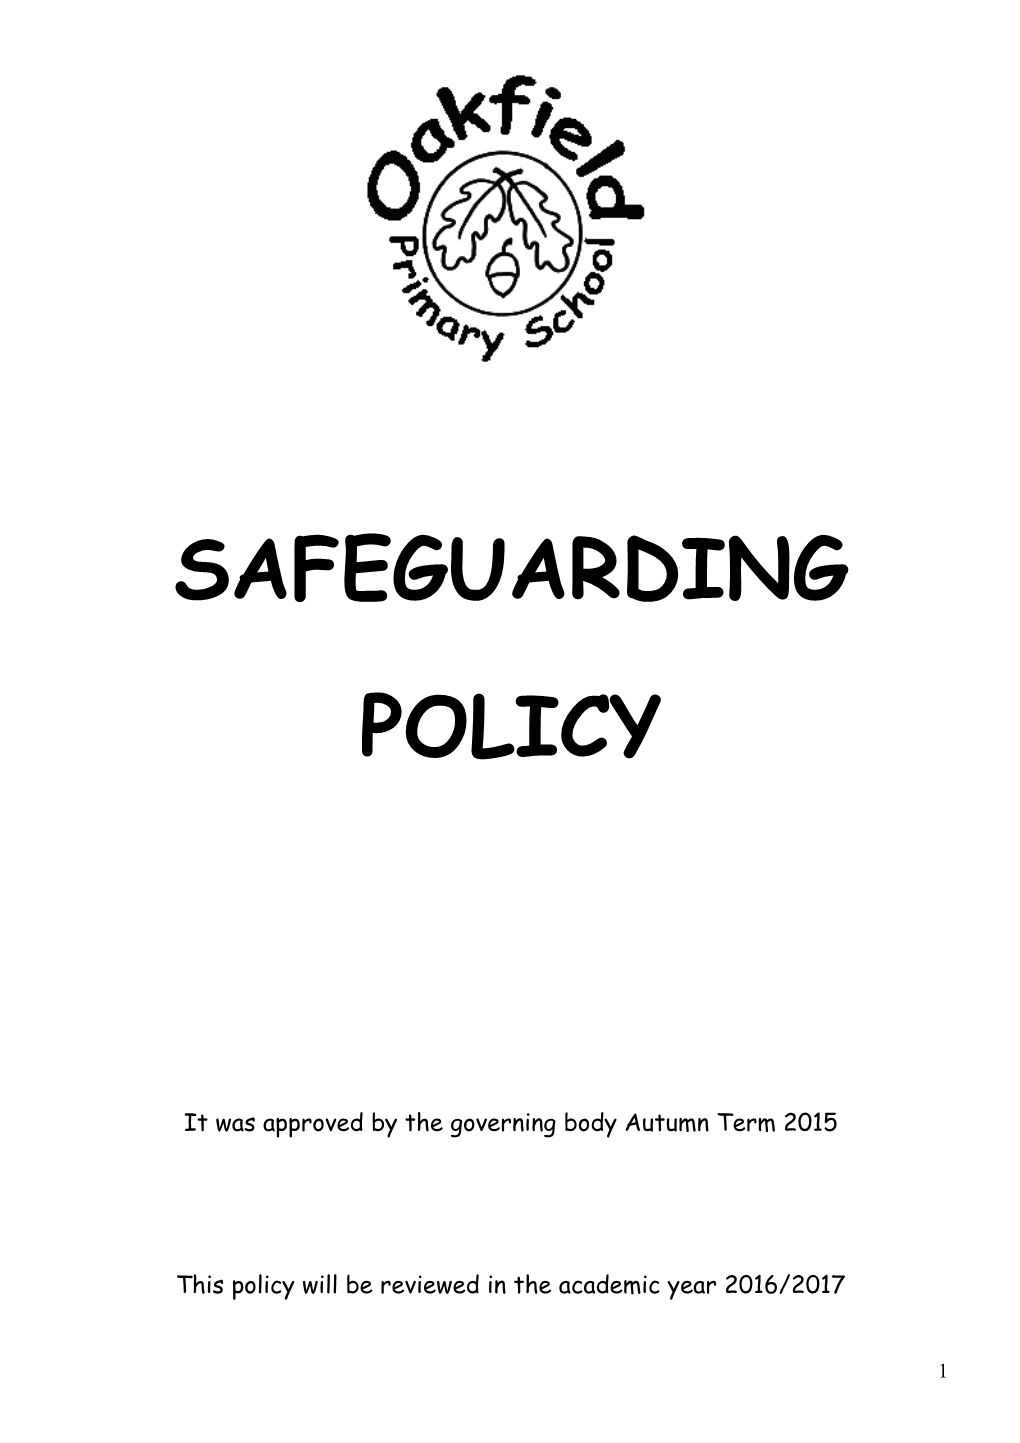 Primary School Safeguarding Policy